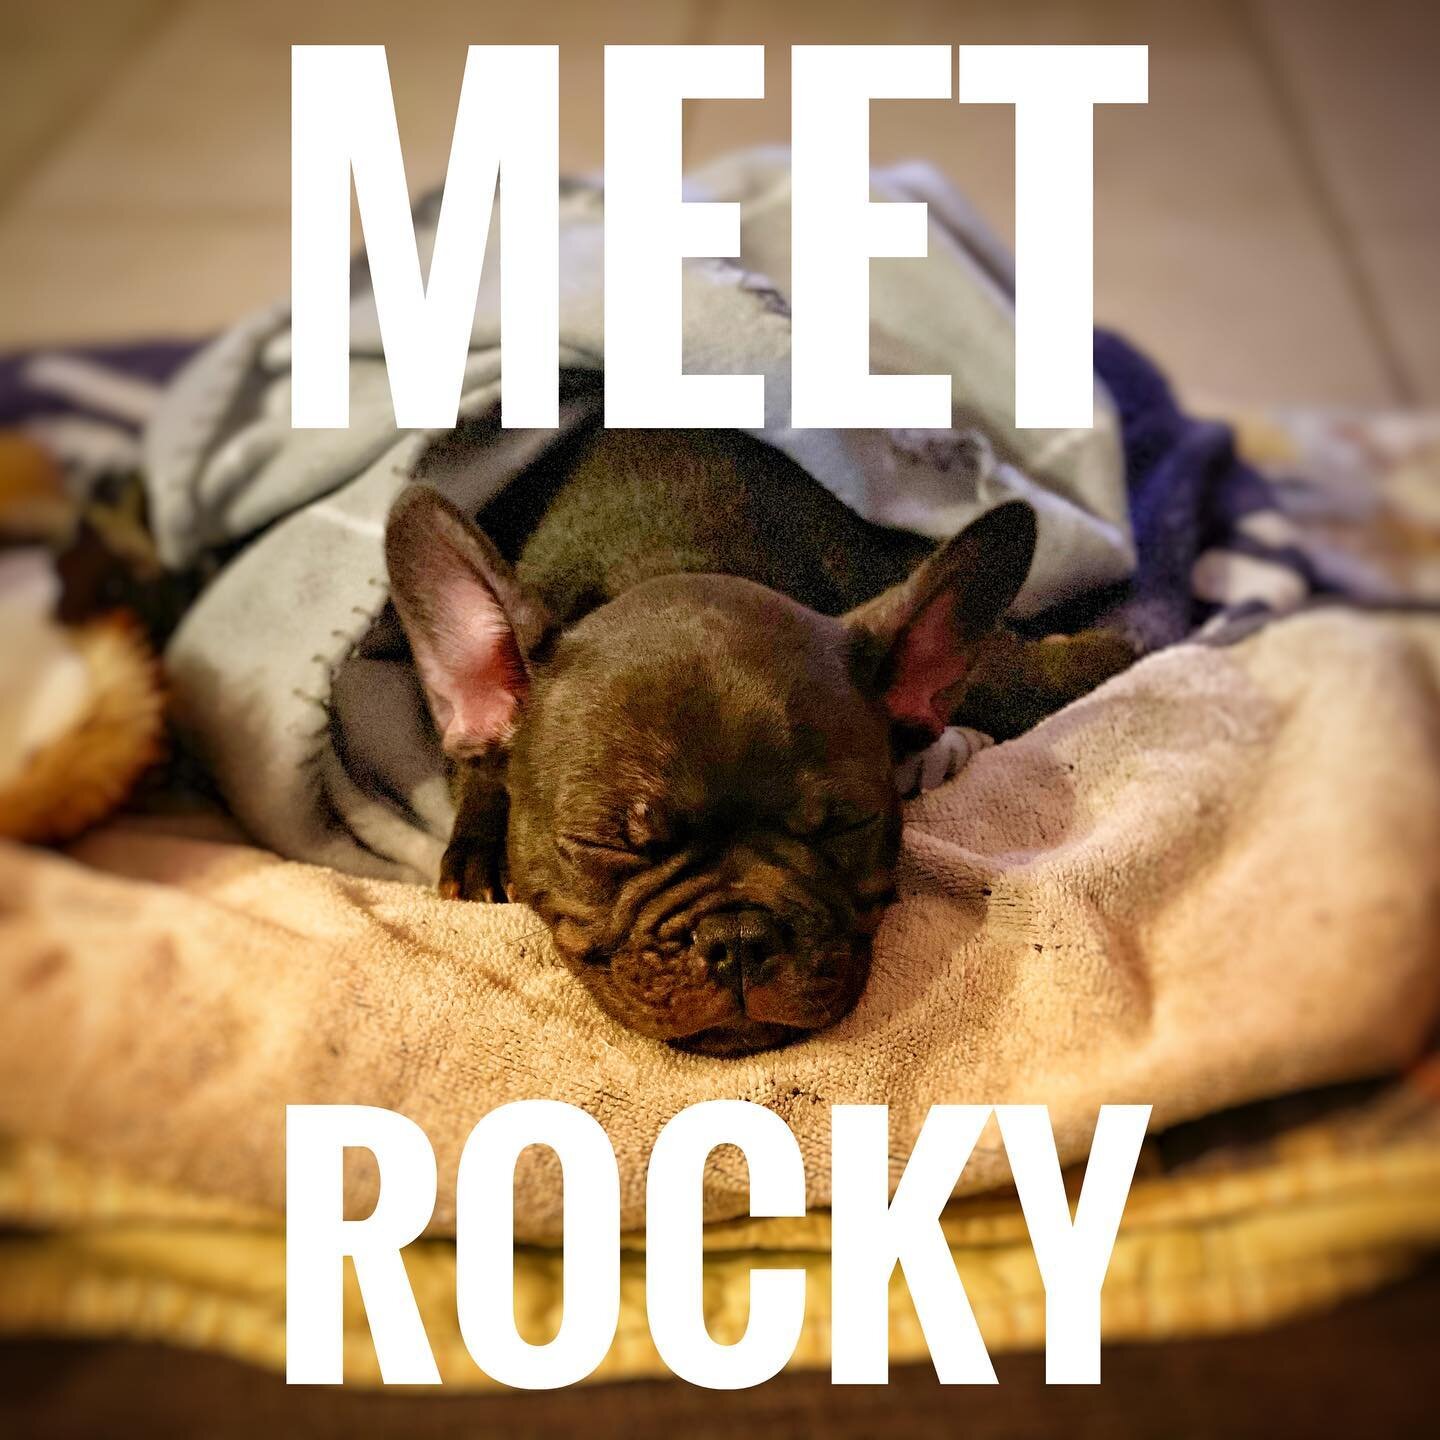 Meet the newest member of the @zam.agency team - Rocky! He&rsquo;s recharging his batteries for he can hit the ground running tomorrow! #frenchbulldog #zamagency #puppylove🐶